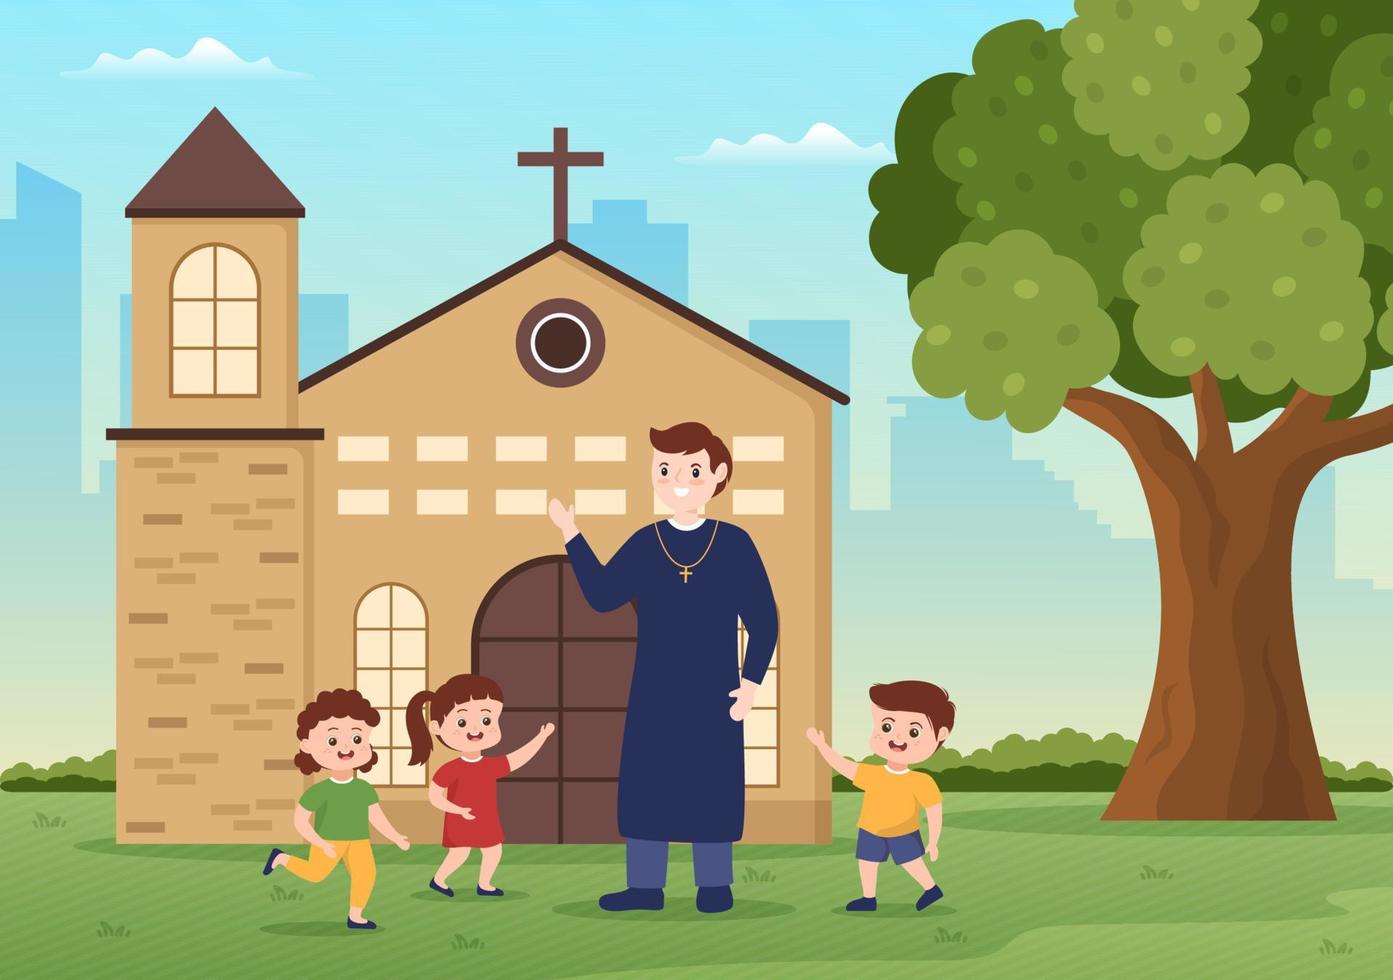 Pastor is Playing with Some Kids in Front of the Inner Catholic church in Flat Cartoon Hand Drawn Template Illustration vector